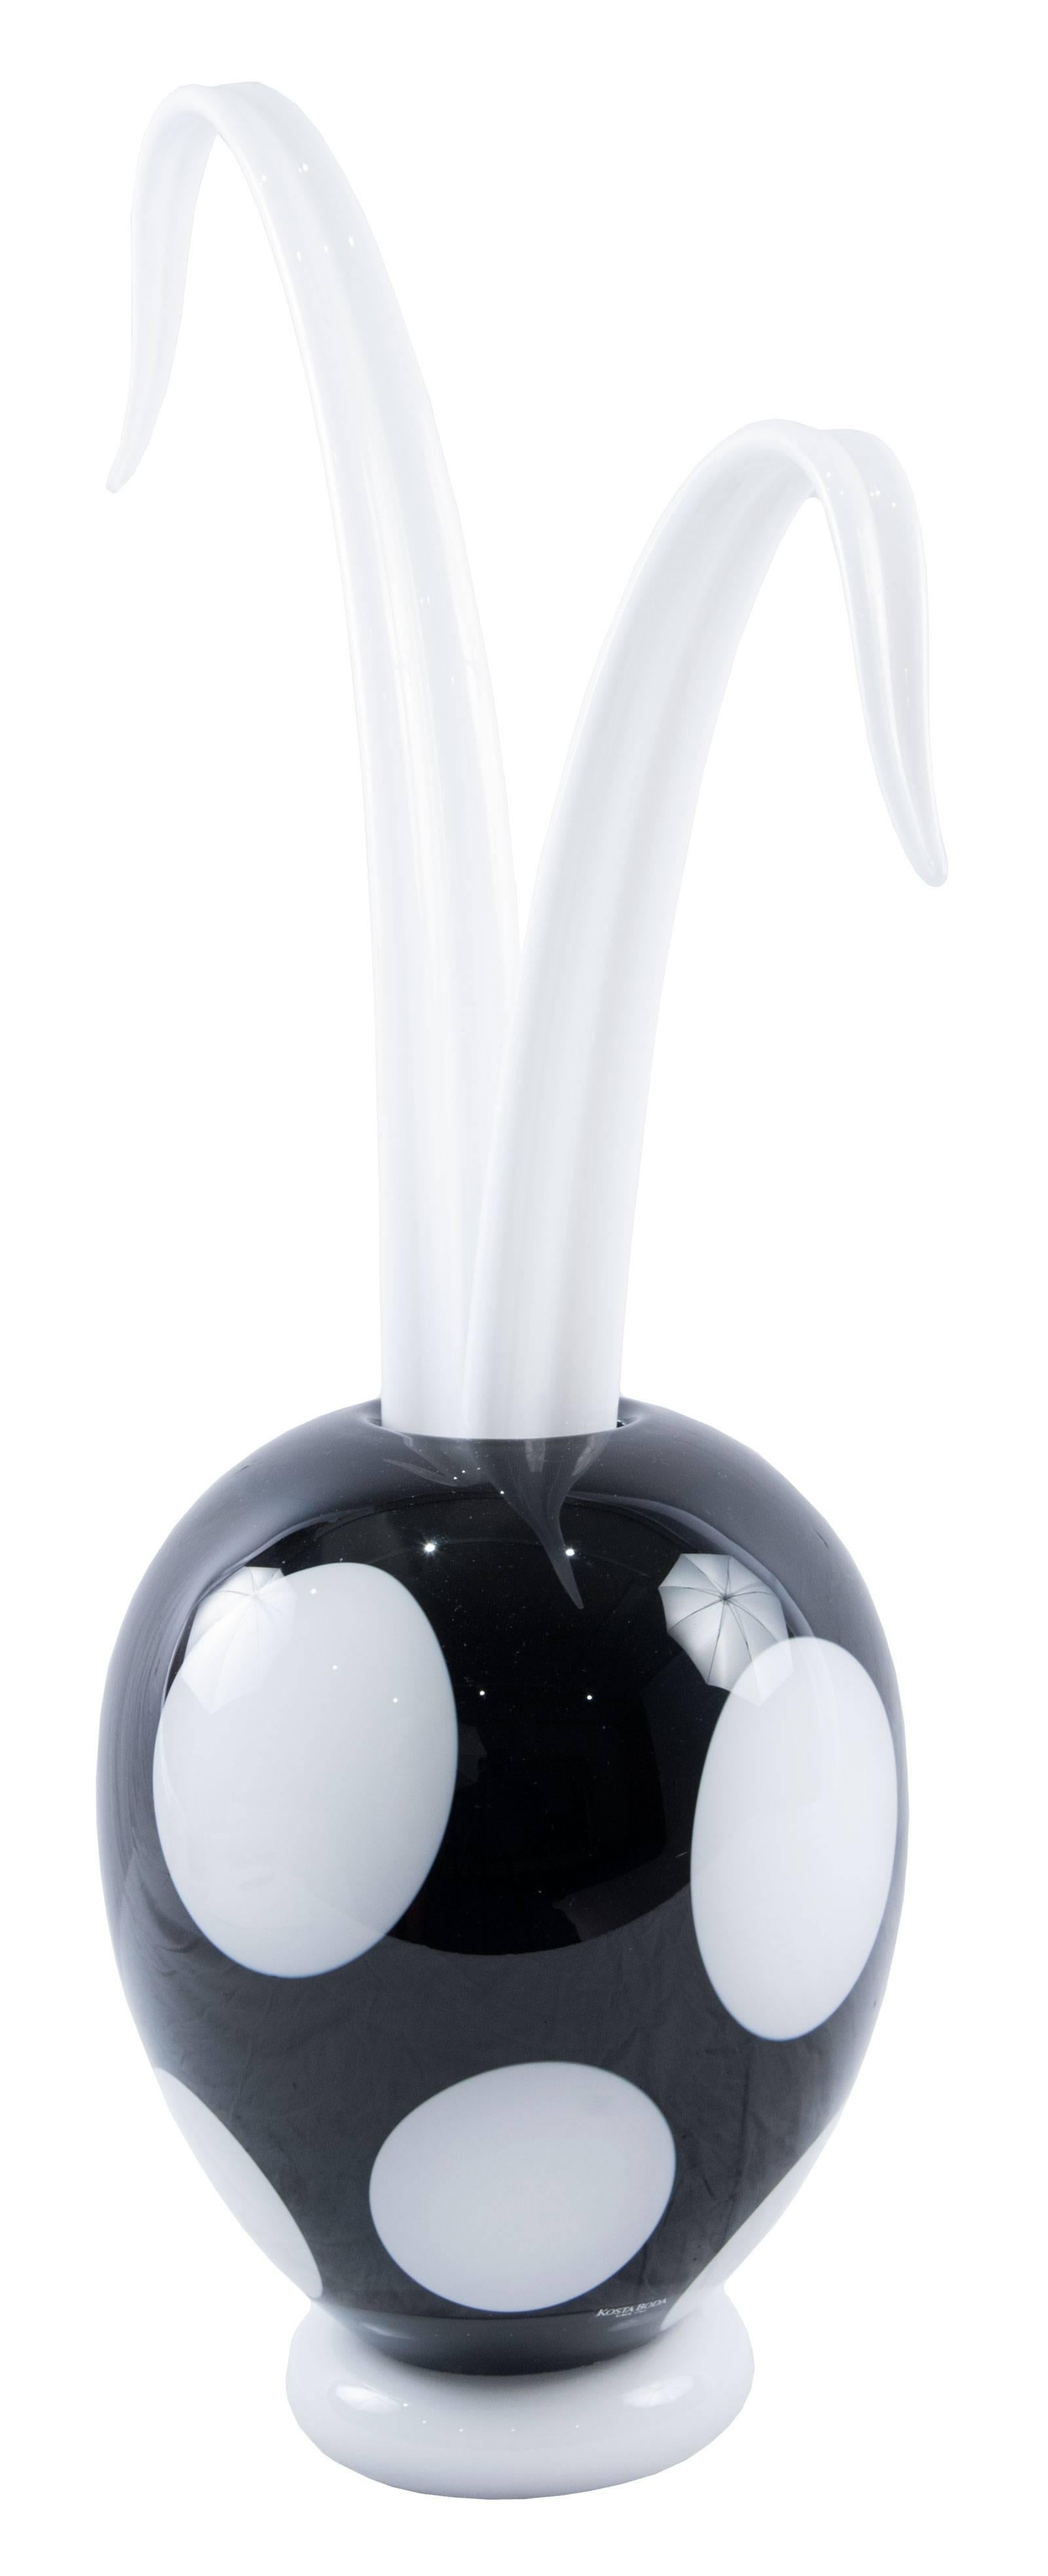 A beautiful Scandinavian glass vase from Kosta Boda by designer Kjell Engman. An ovoid black ground body decorated with large white dots with tall, organically shaped tendrils emerging from within the vase, all mounted on a white base. Engman